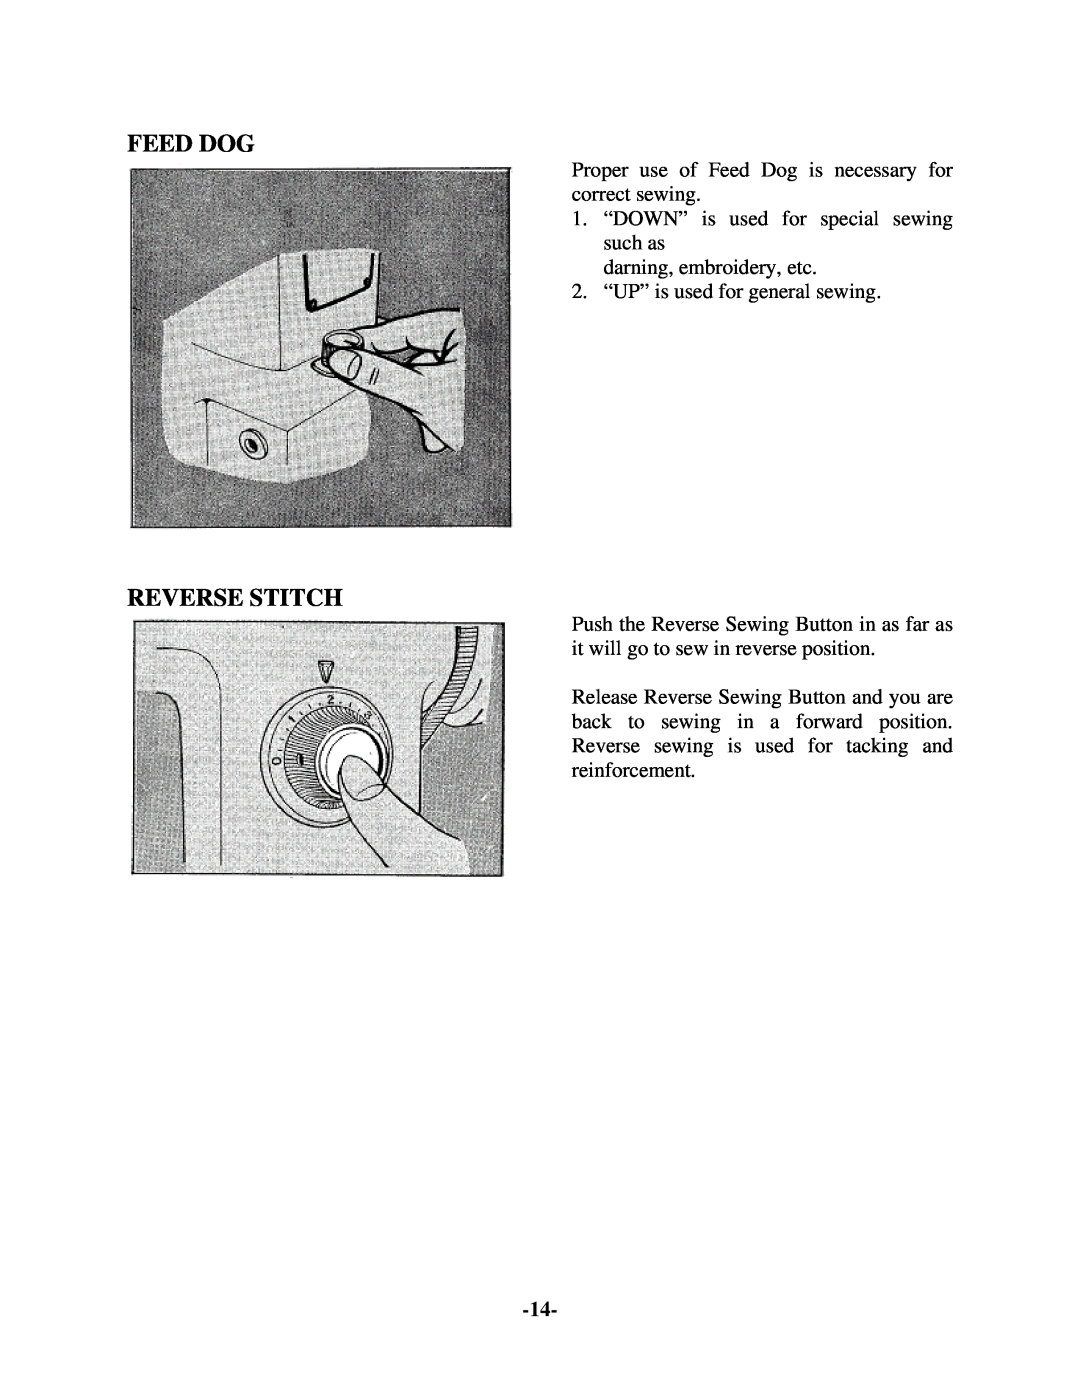 Brother 681B-UG manual Reverse Stitch, Proper use of Feed Dog is necessary for correct sewing 